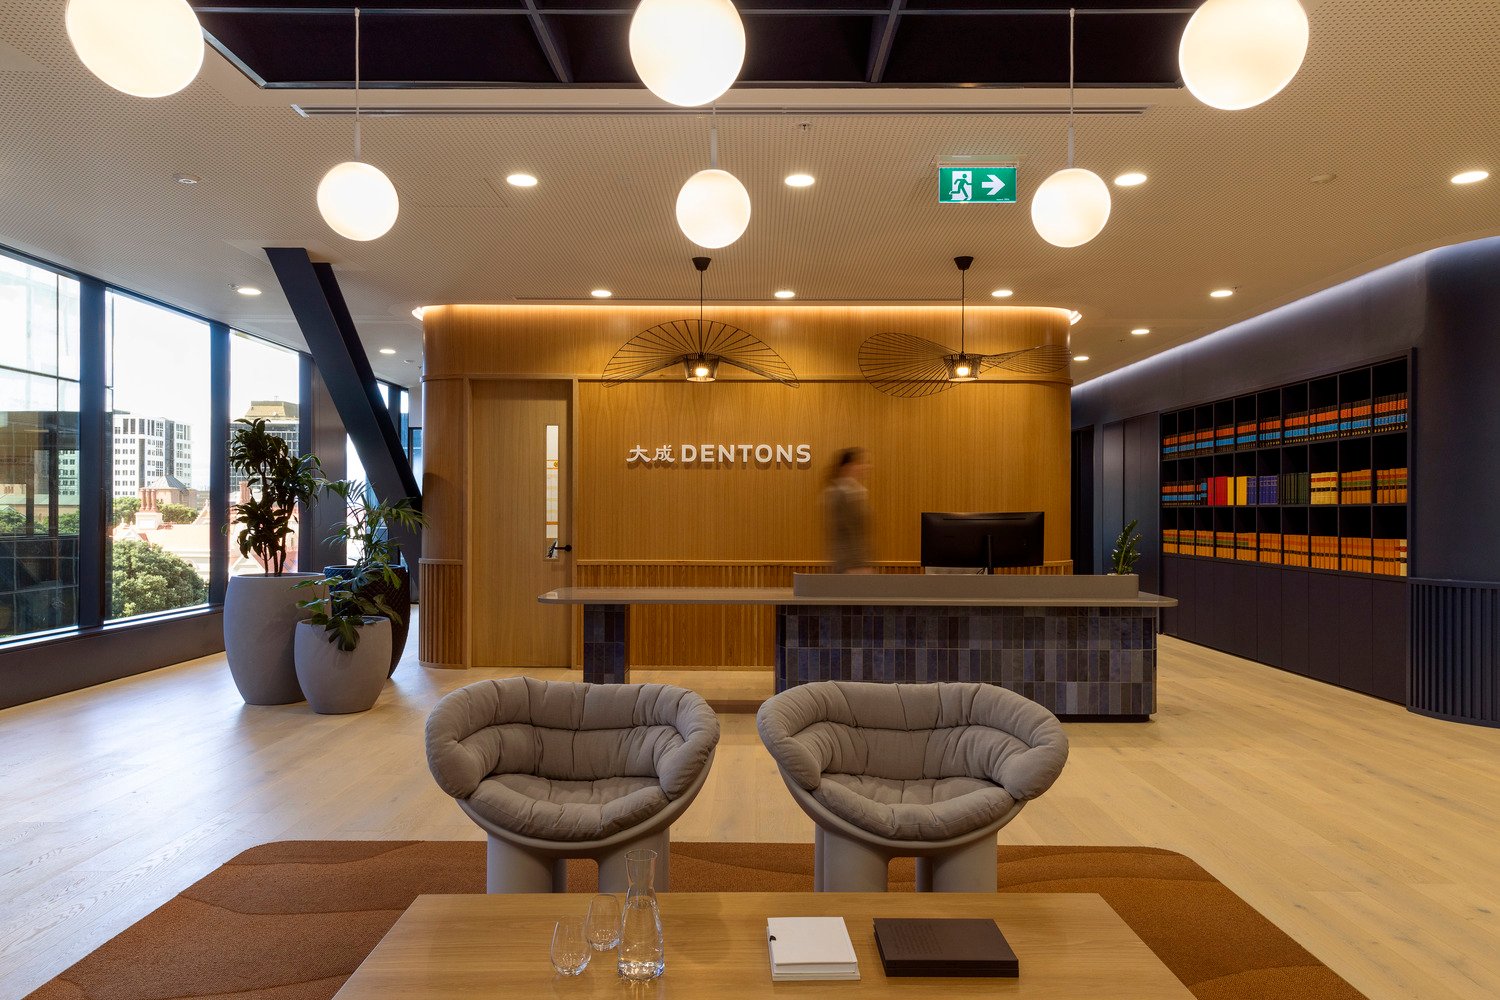 Dentons reception and client waiting area